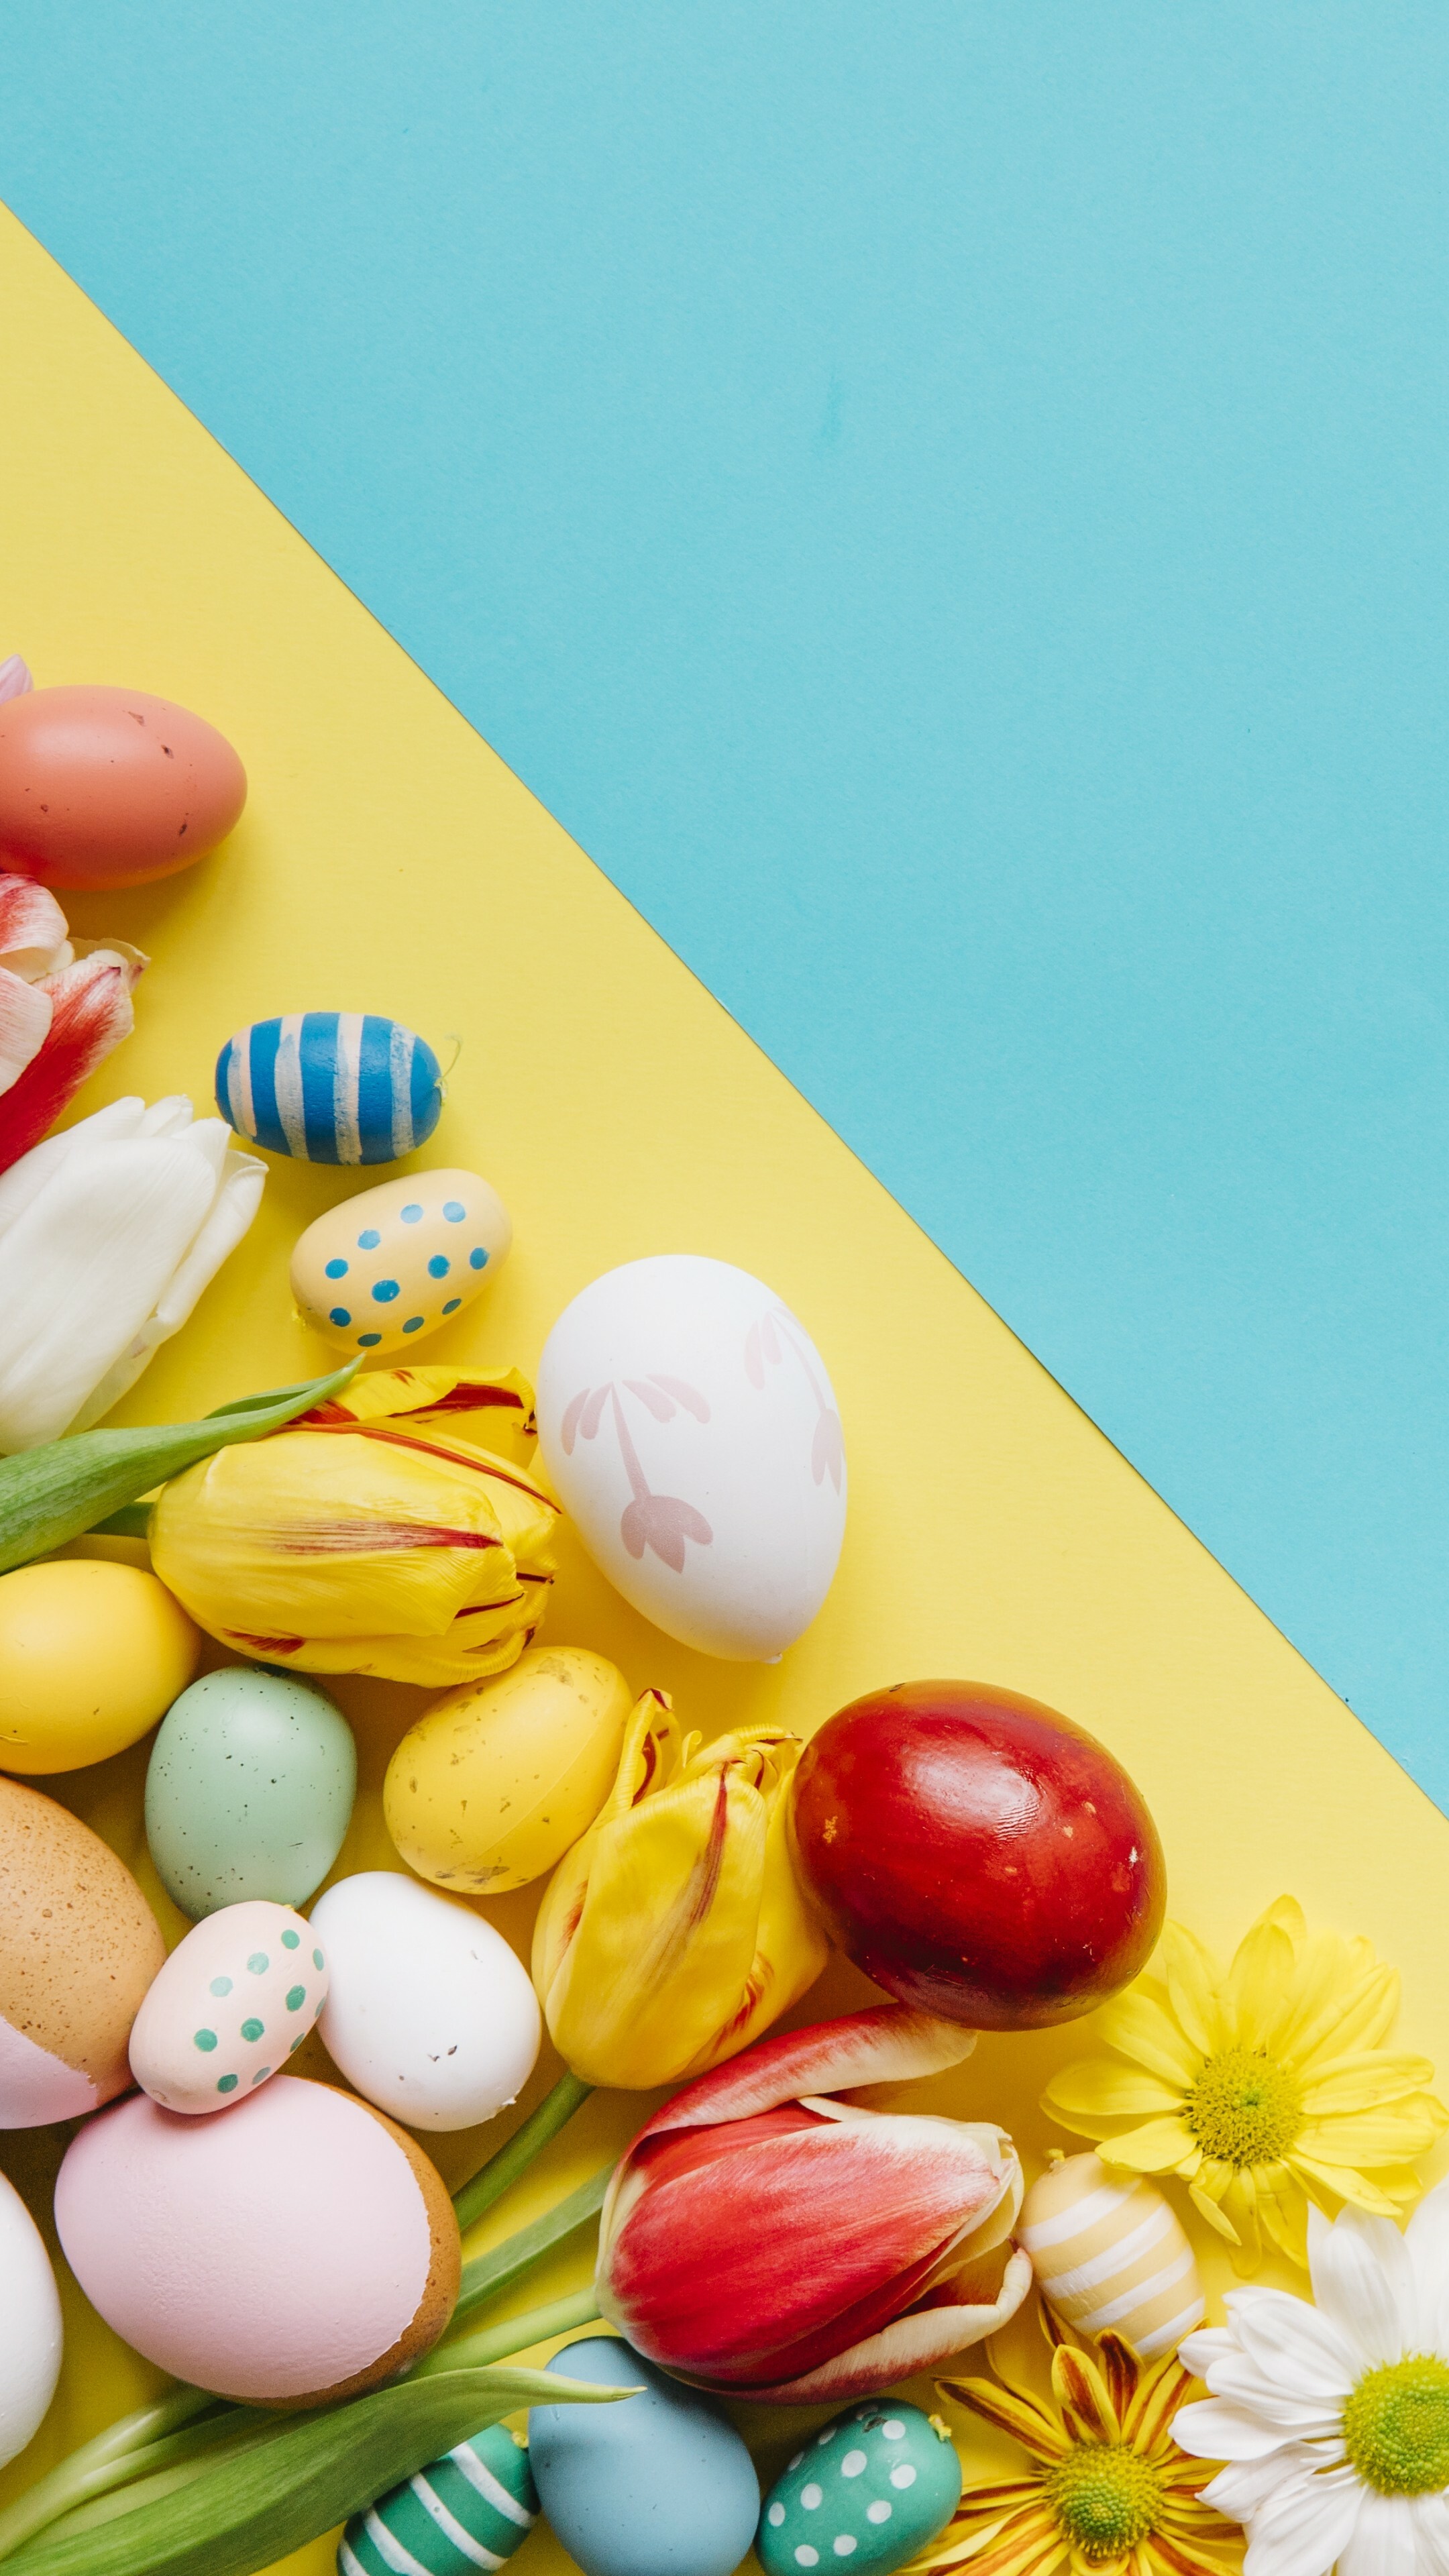 Easter: Decoration and the communal breaking of eggs is a part of the holiday. 2160x3840 4K Wallpaper.